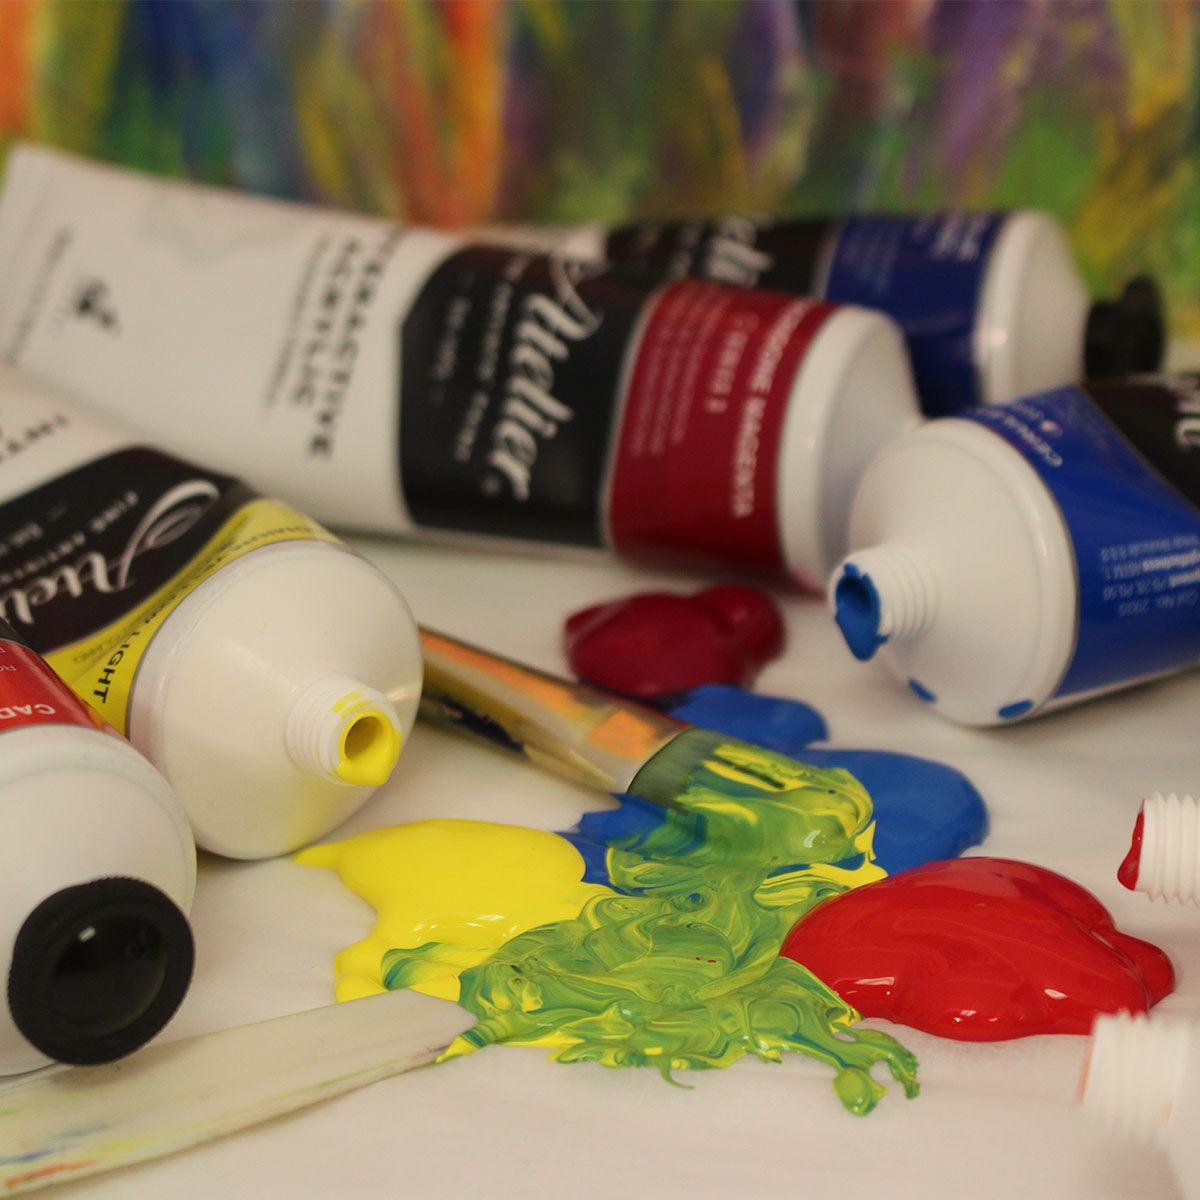 Atelier Interactive Acrylic Paint – Art Material Supplies